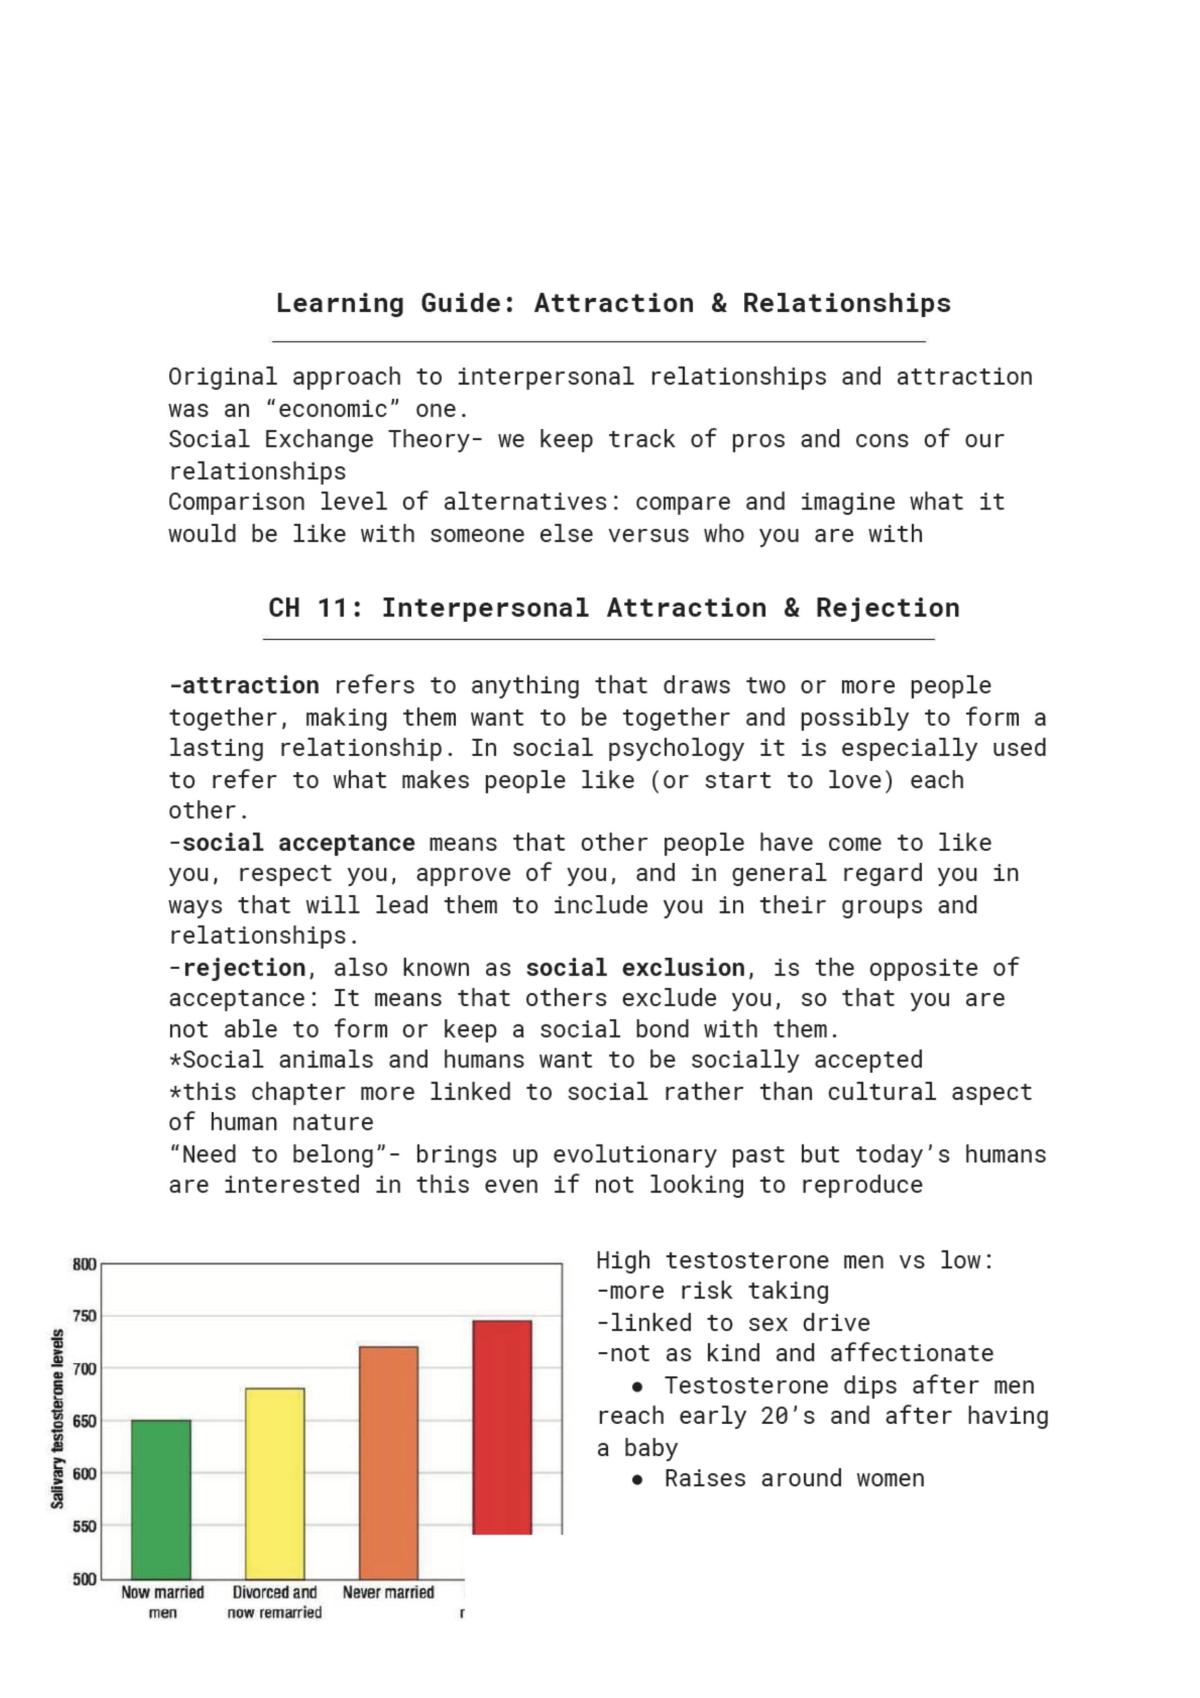 Learning Guide: Attraction and Relationships - Page 1